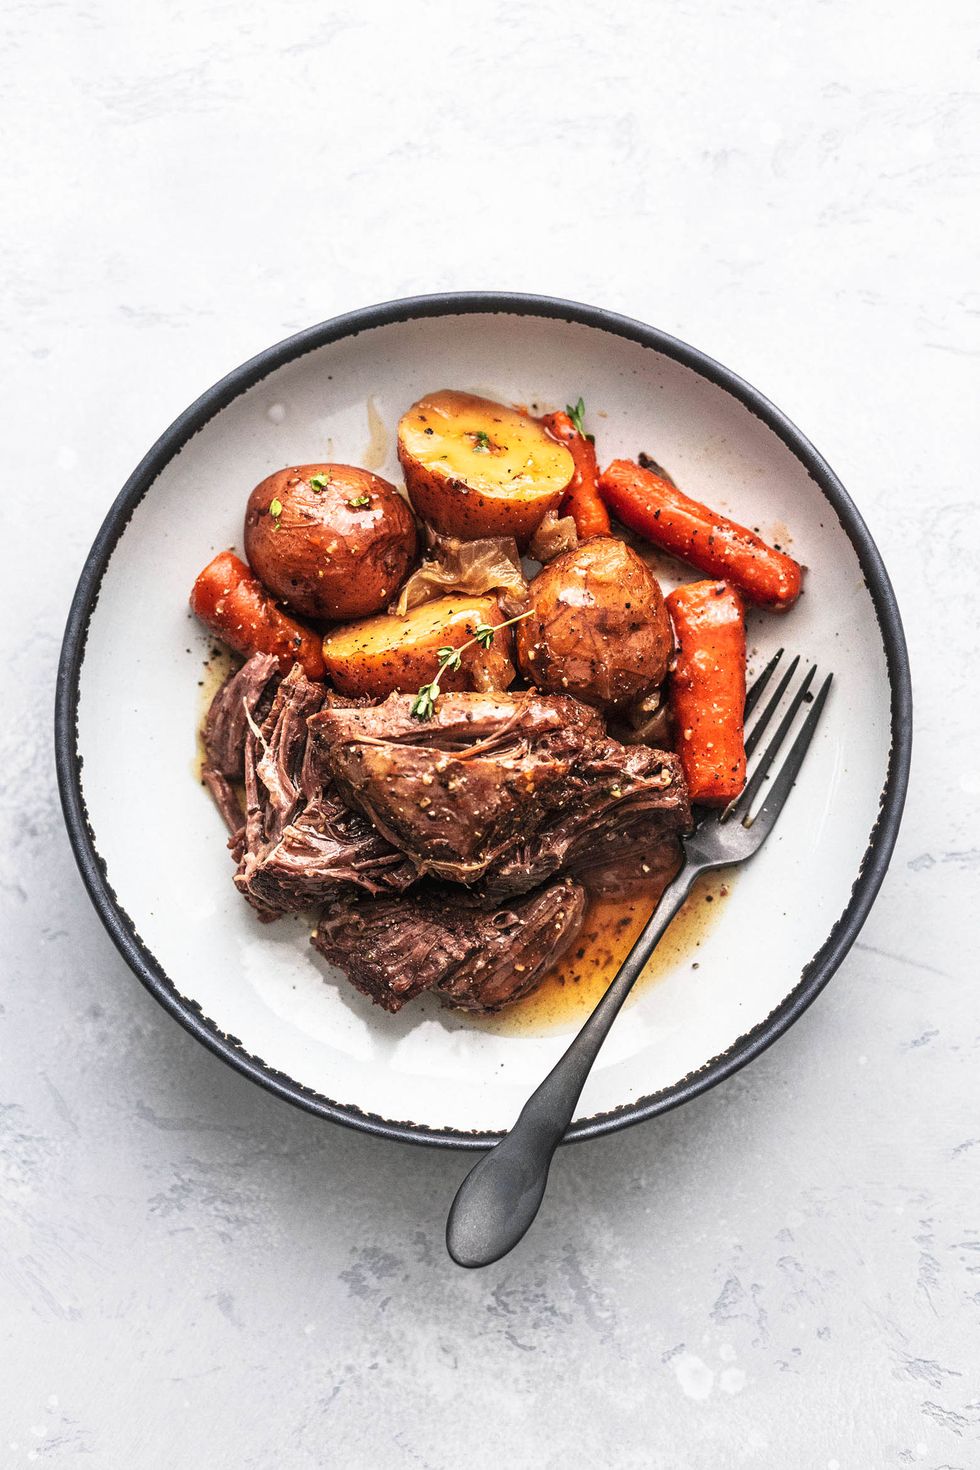 https://hips.hearstapps.com/hmg-prod/images/slow-cooker-beef-recipes-roast-1577738202.jpg?crop=1xw:1xh;center,top&resize=980:*